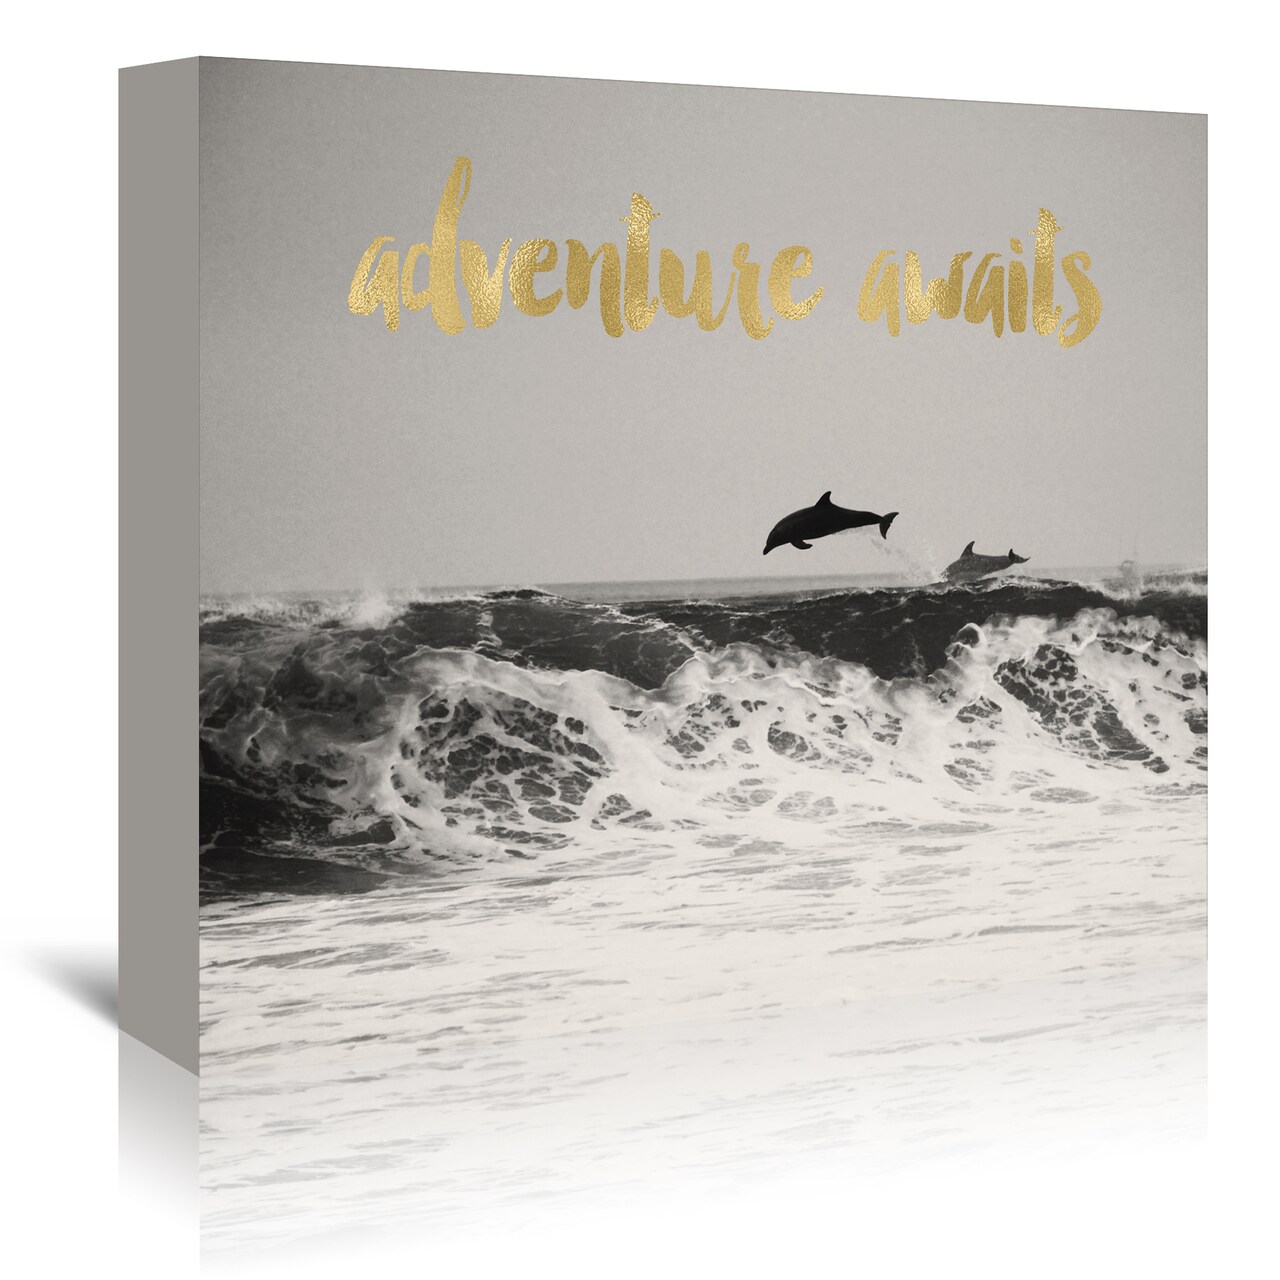 Dolphins Adventure Awaits Gold On Bwphoto by Amy Brinkman  Gallery Wrapped Canvas - Americanflat